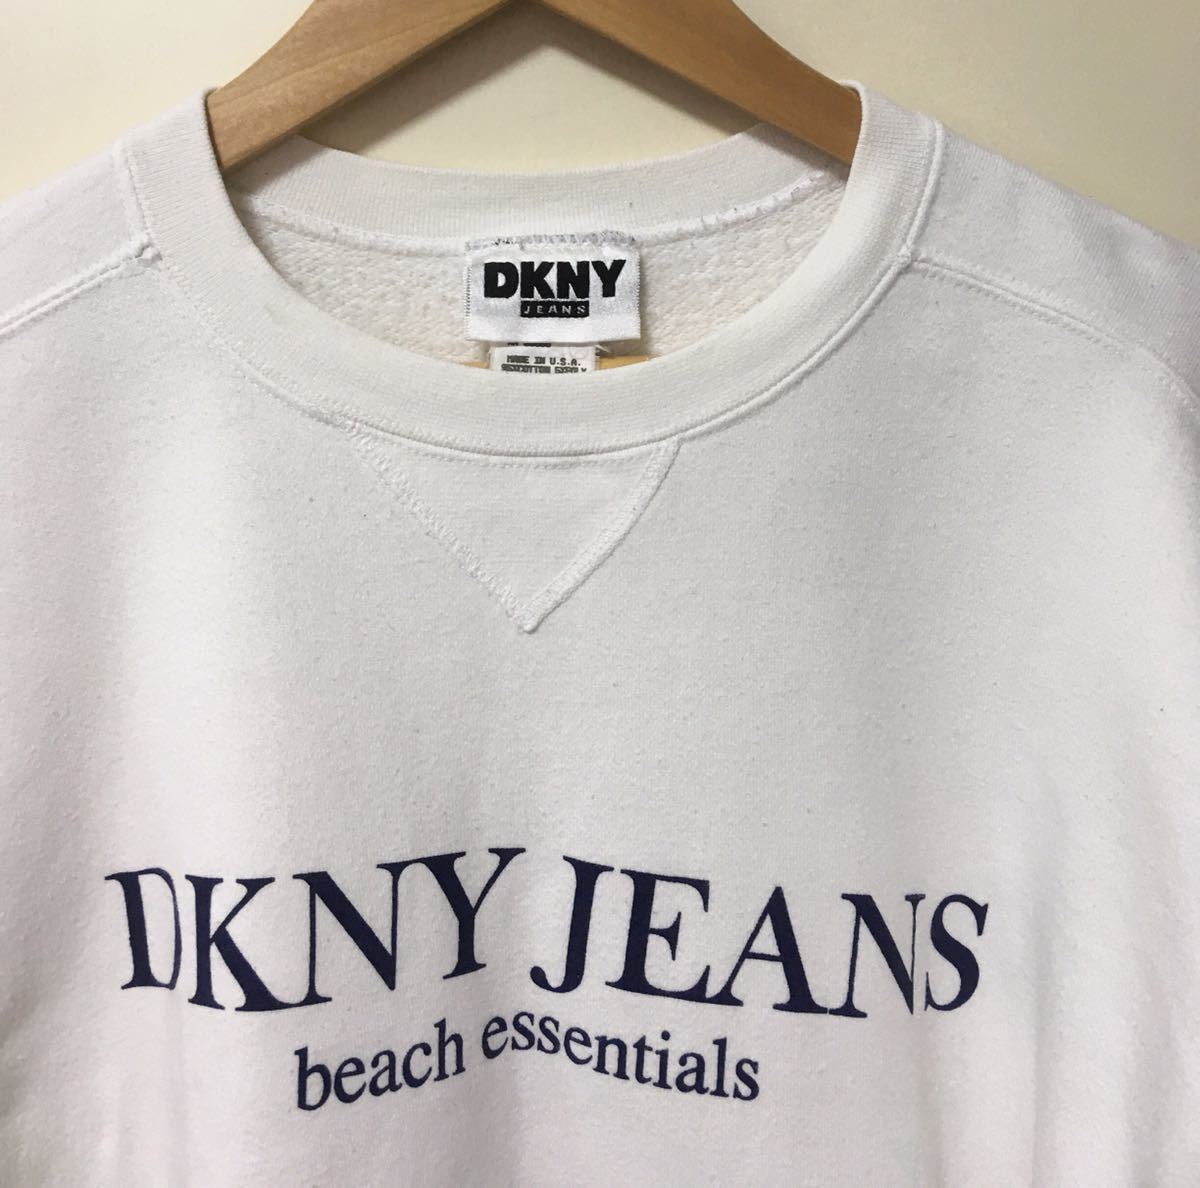 USA製 90’s DKNY JEANS プリントロゴスウェット ダナキャランニューヨーク ヴィンテージ 90年代 ワンサイズ Made in U.S.A_画像3